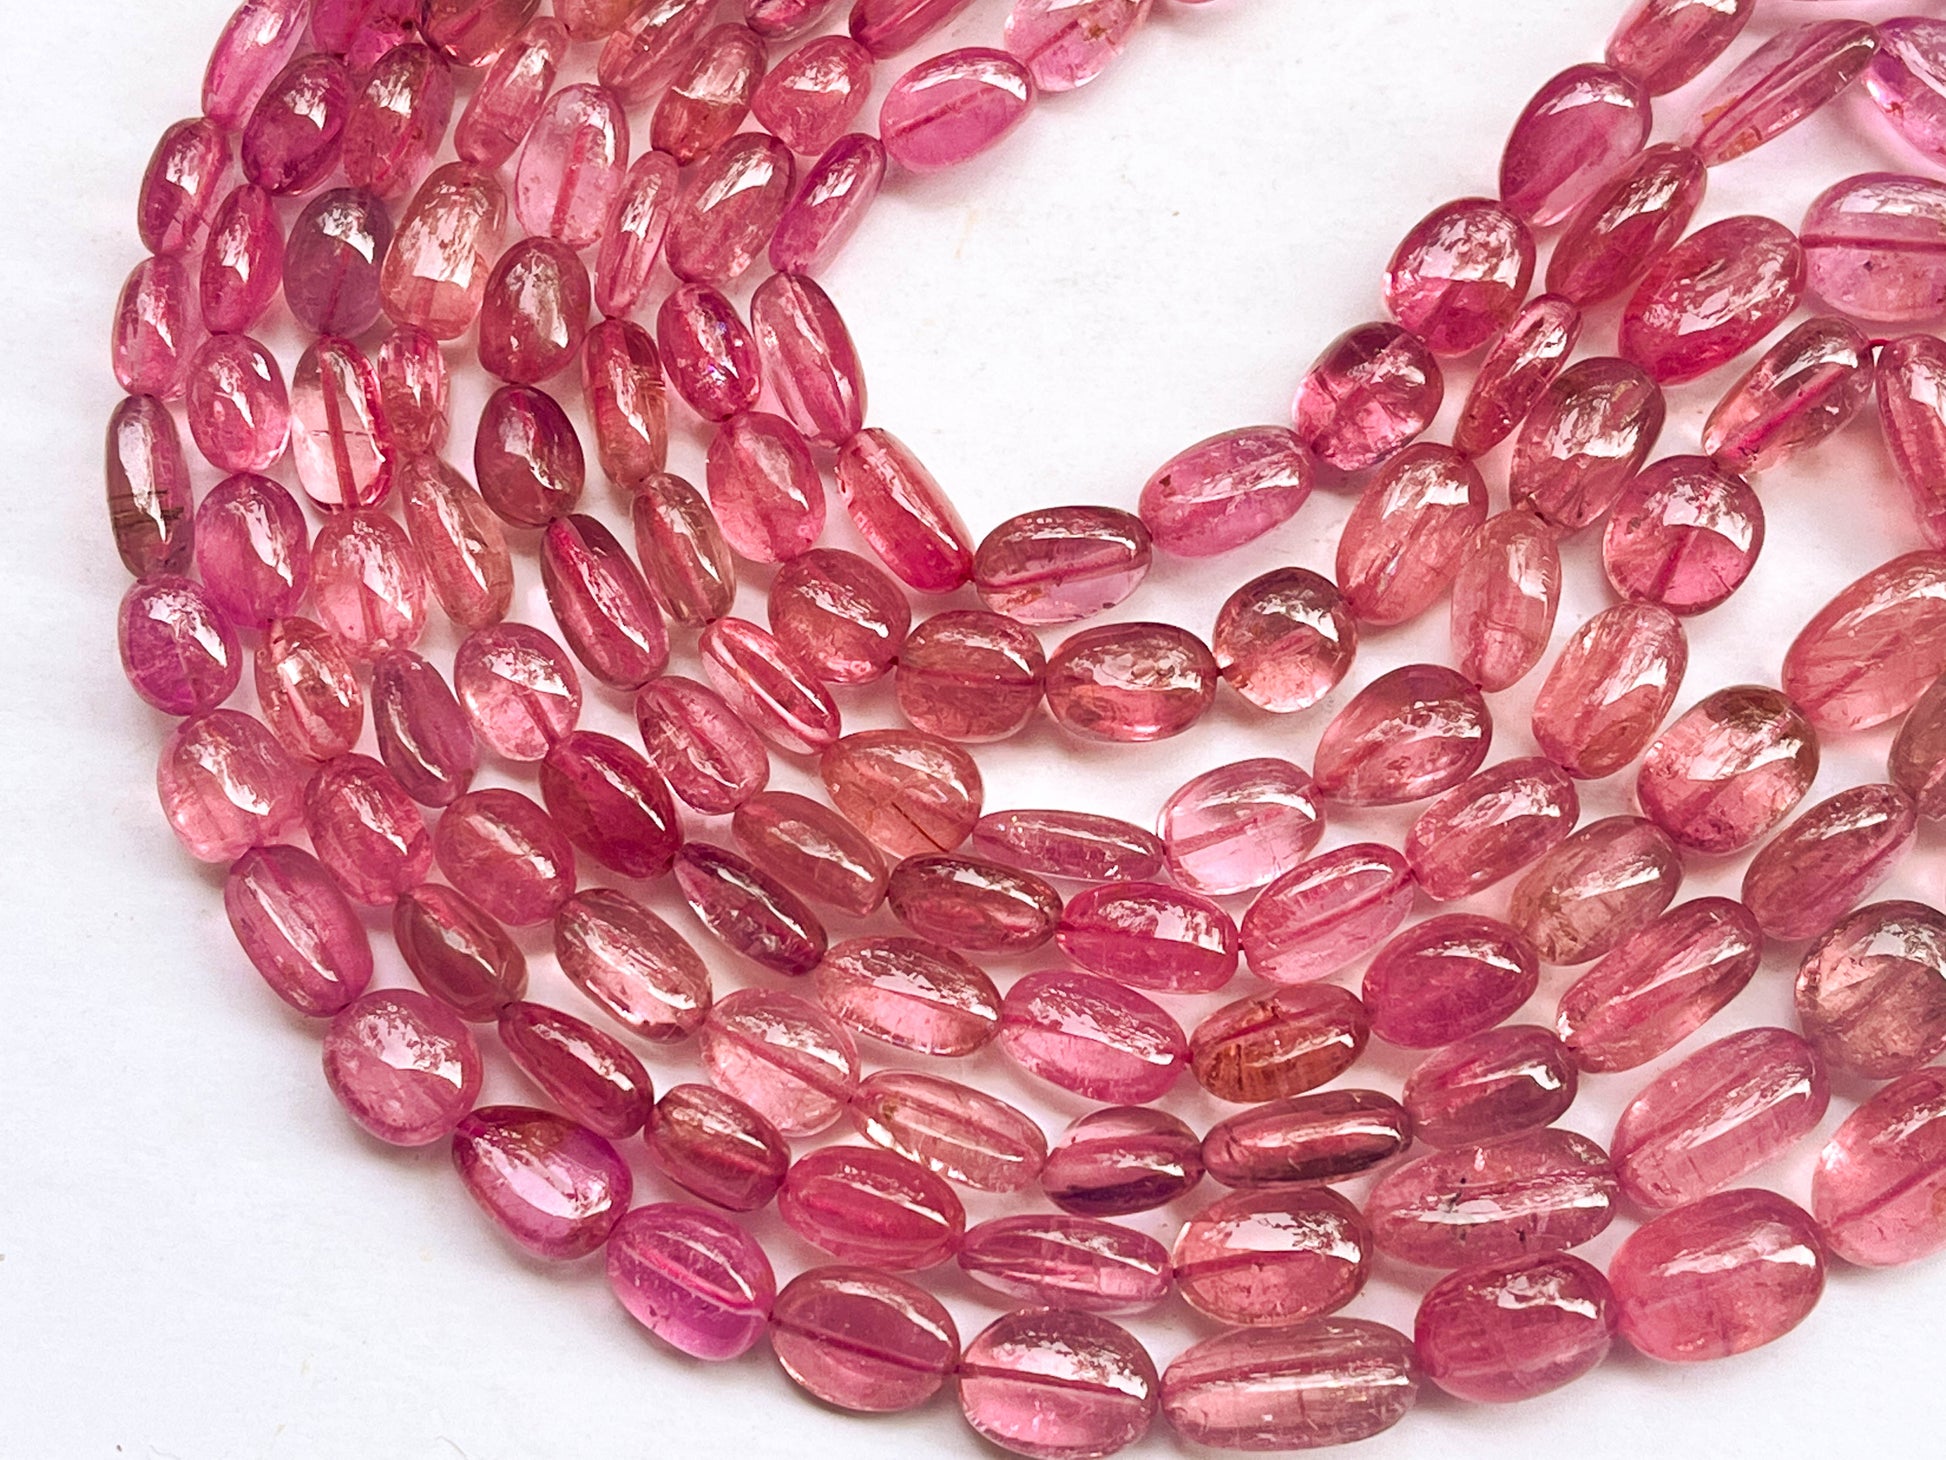 Natural Pink Tourmaline Smooth Tumble or Nuggets Shape Beads | 16 Inch Beadsforyourjewelry